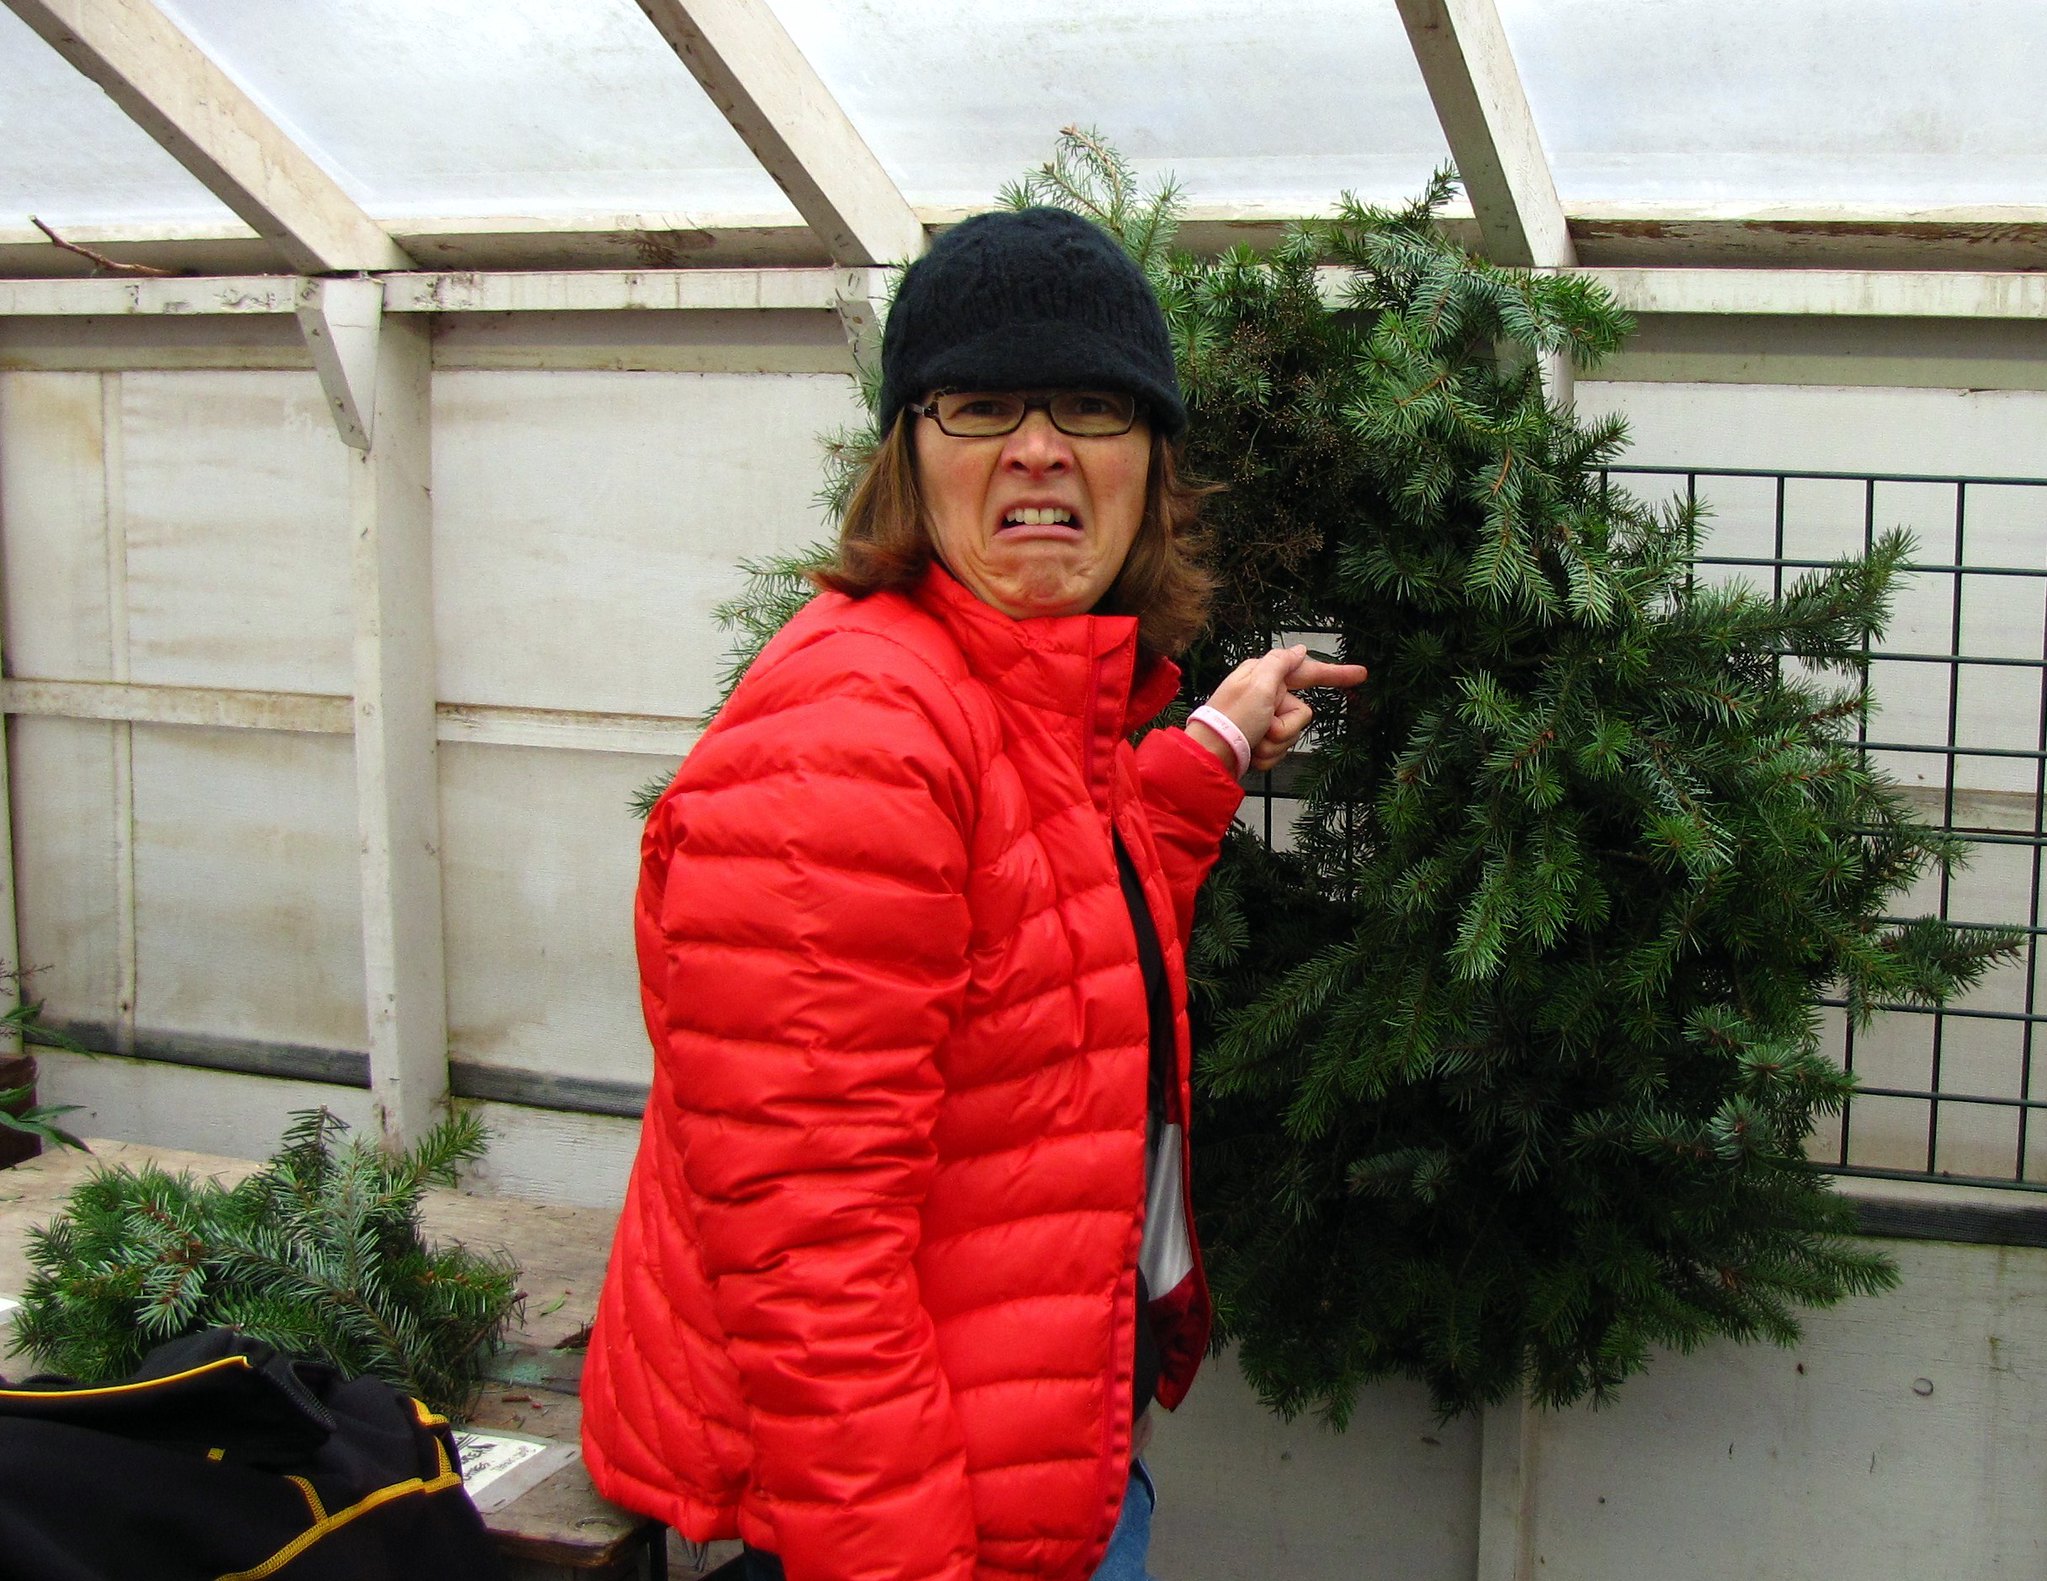 A woman makes a disgusted face and points to a messy pine wreath.